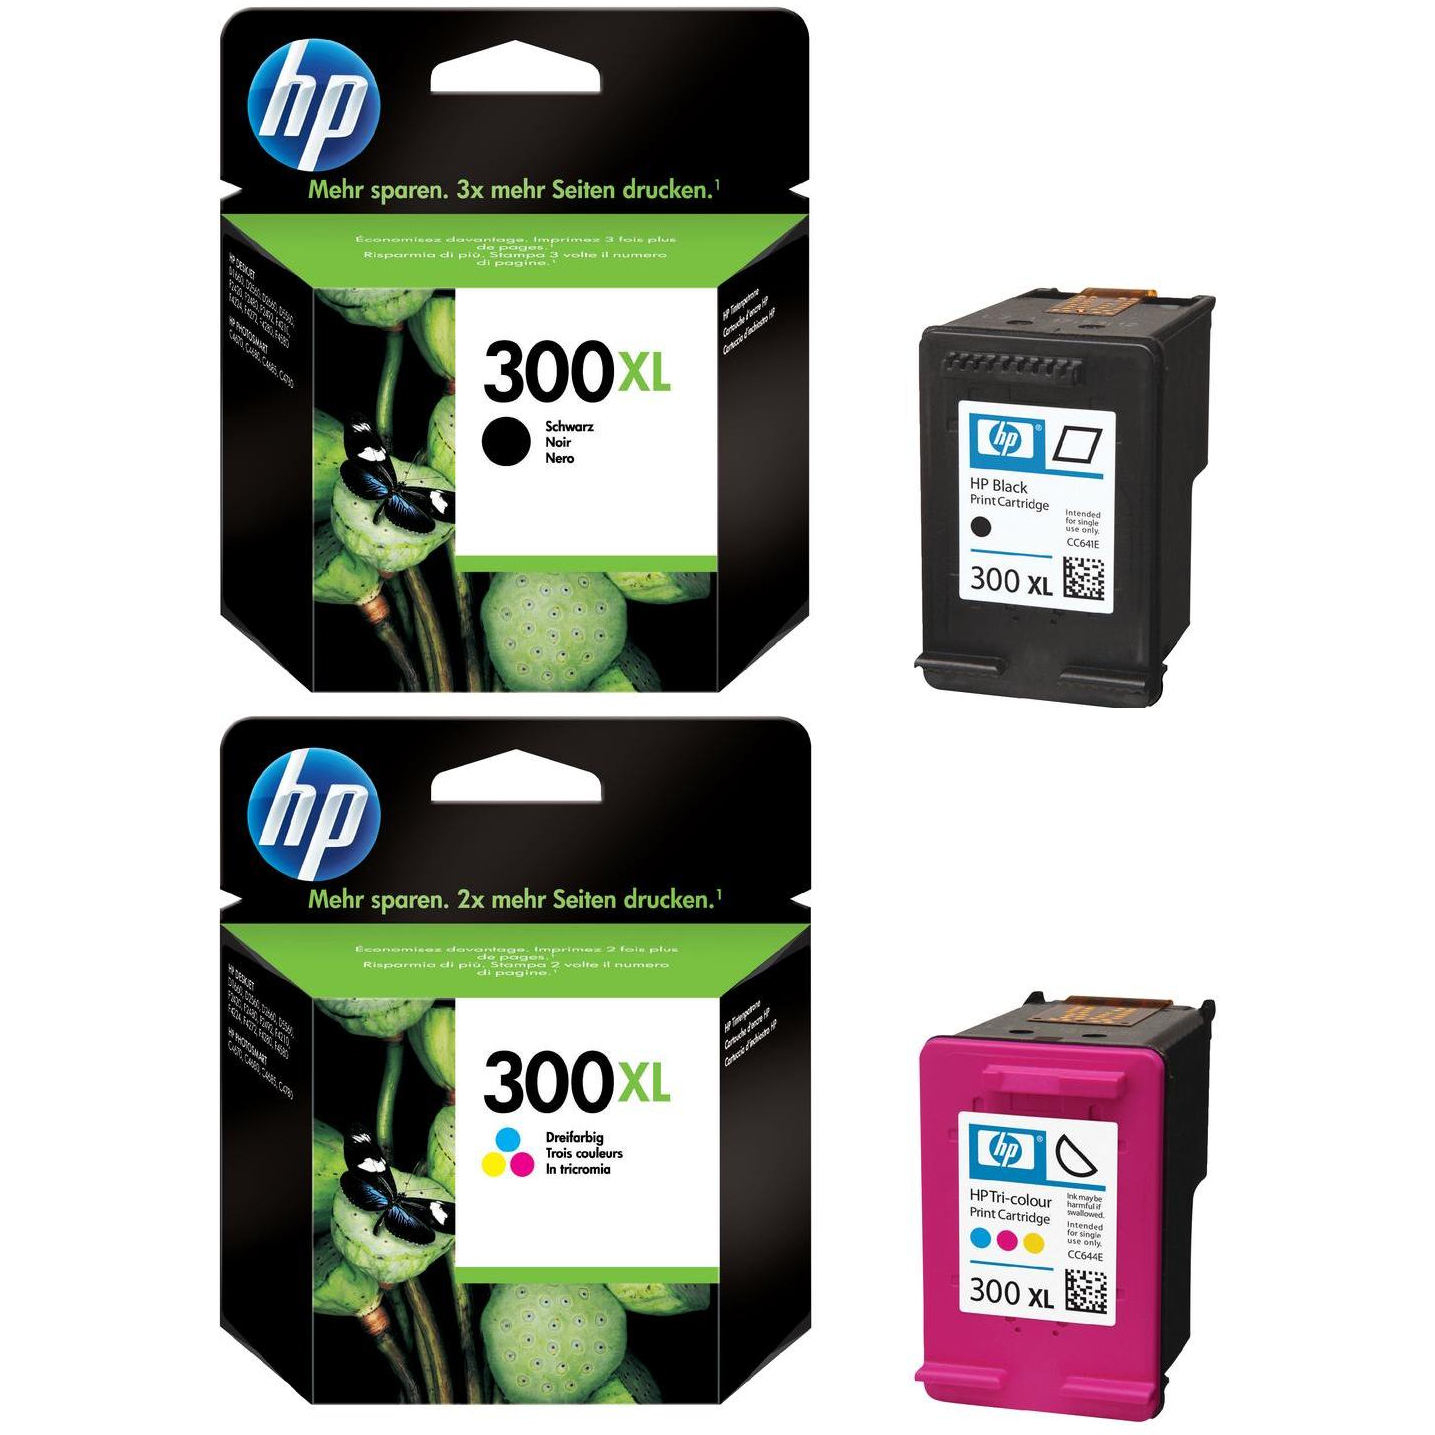 Related to HP OFFICEJET 610: HP-300XL-Pack